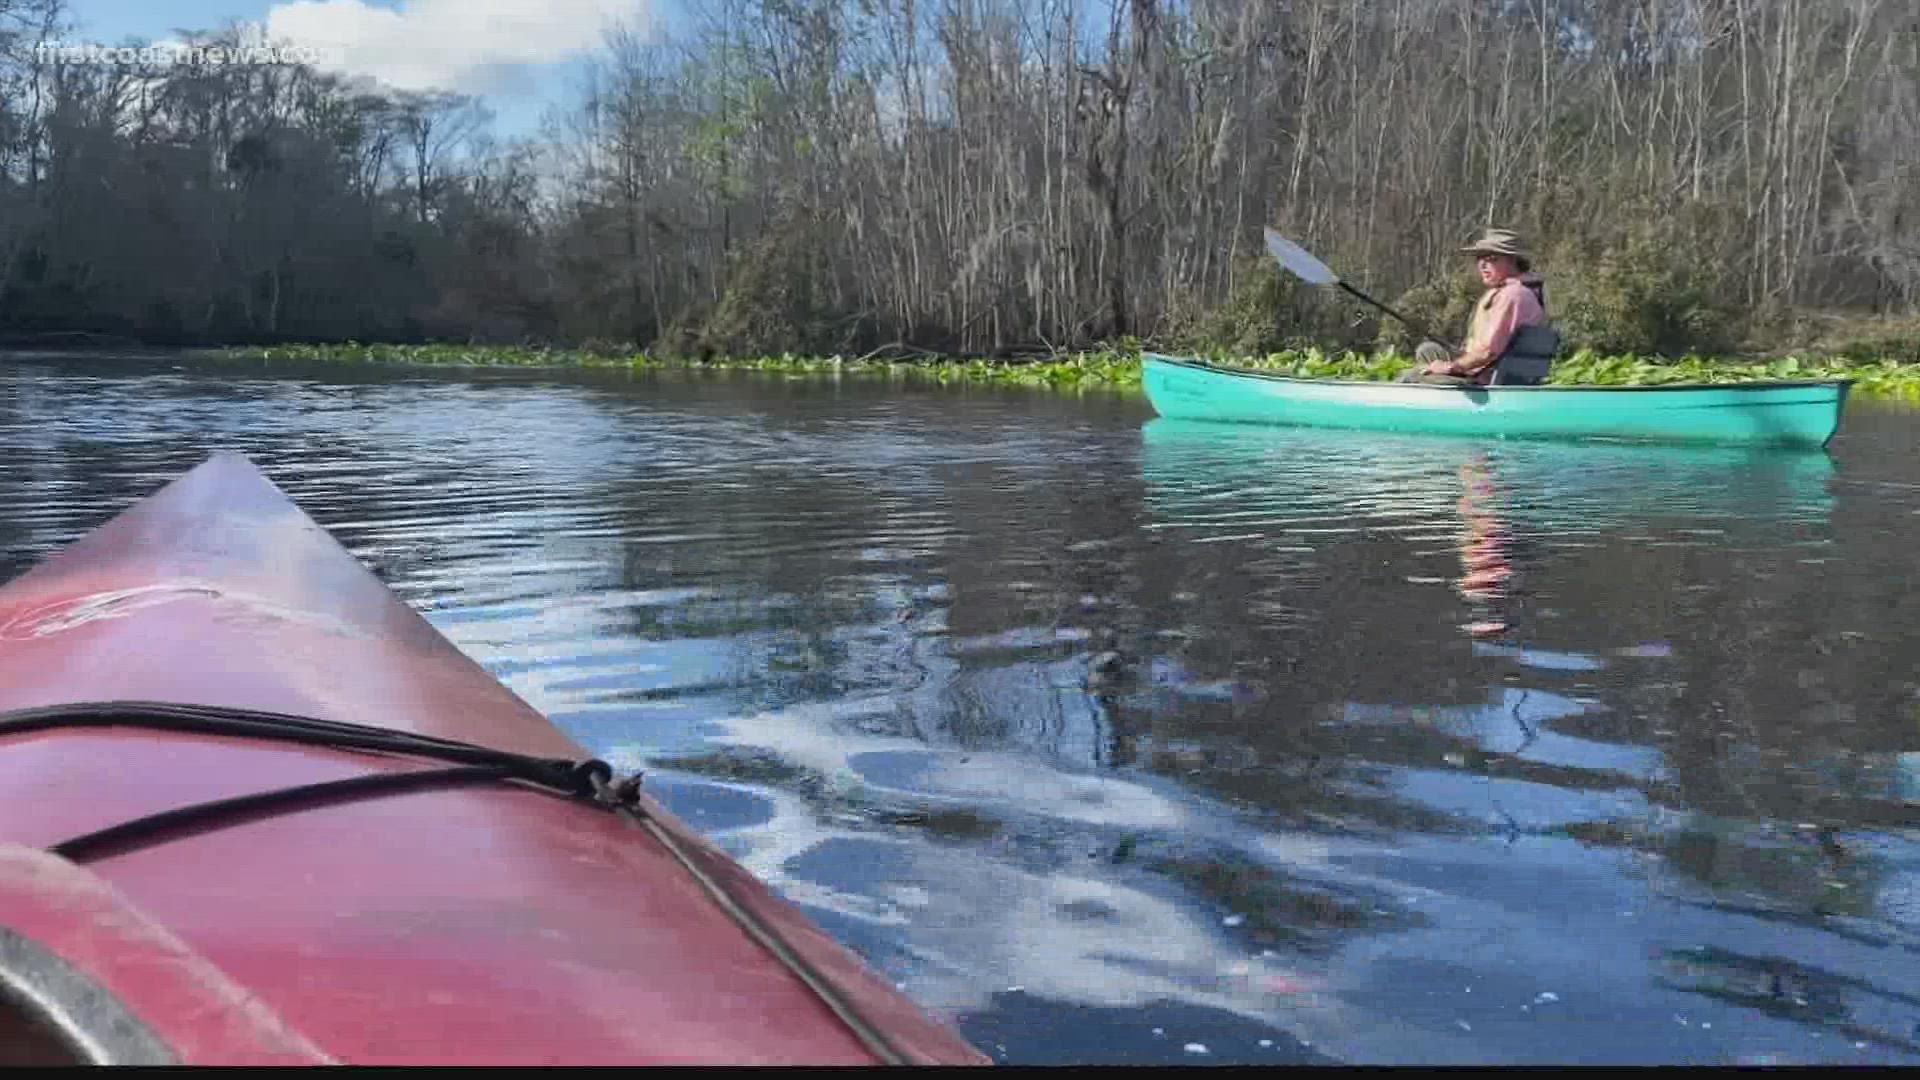 All year, the St. Johns Riverkeeper has planned special events to help visitors and Floridians explore the St. Johns River and the nearly 9,000 square mile waterways